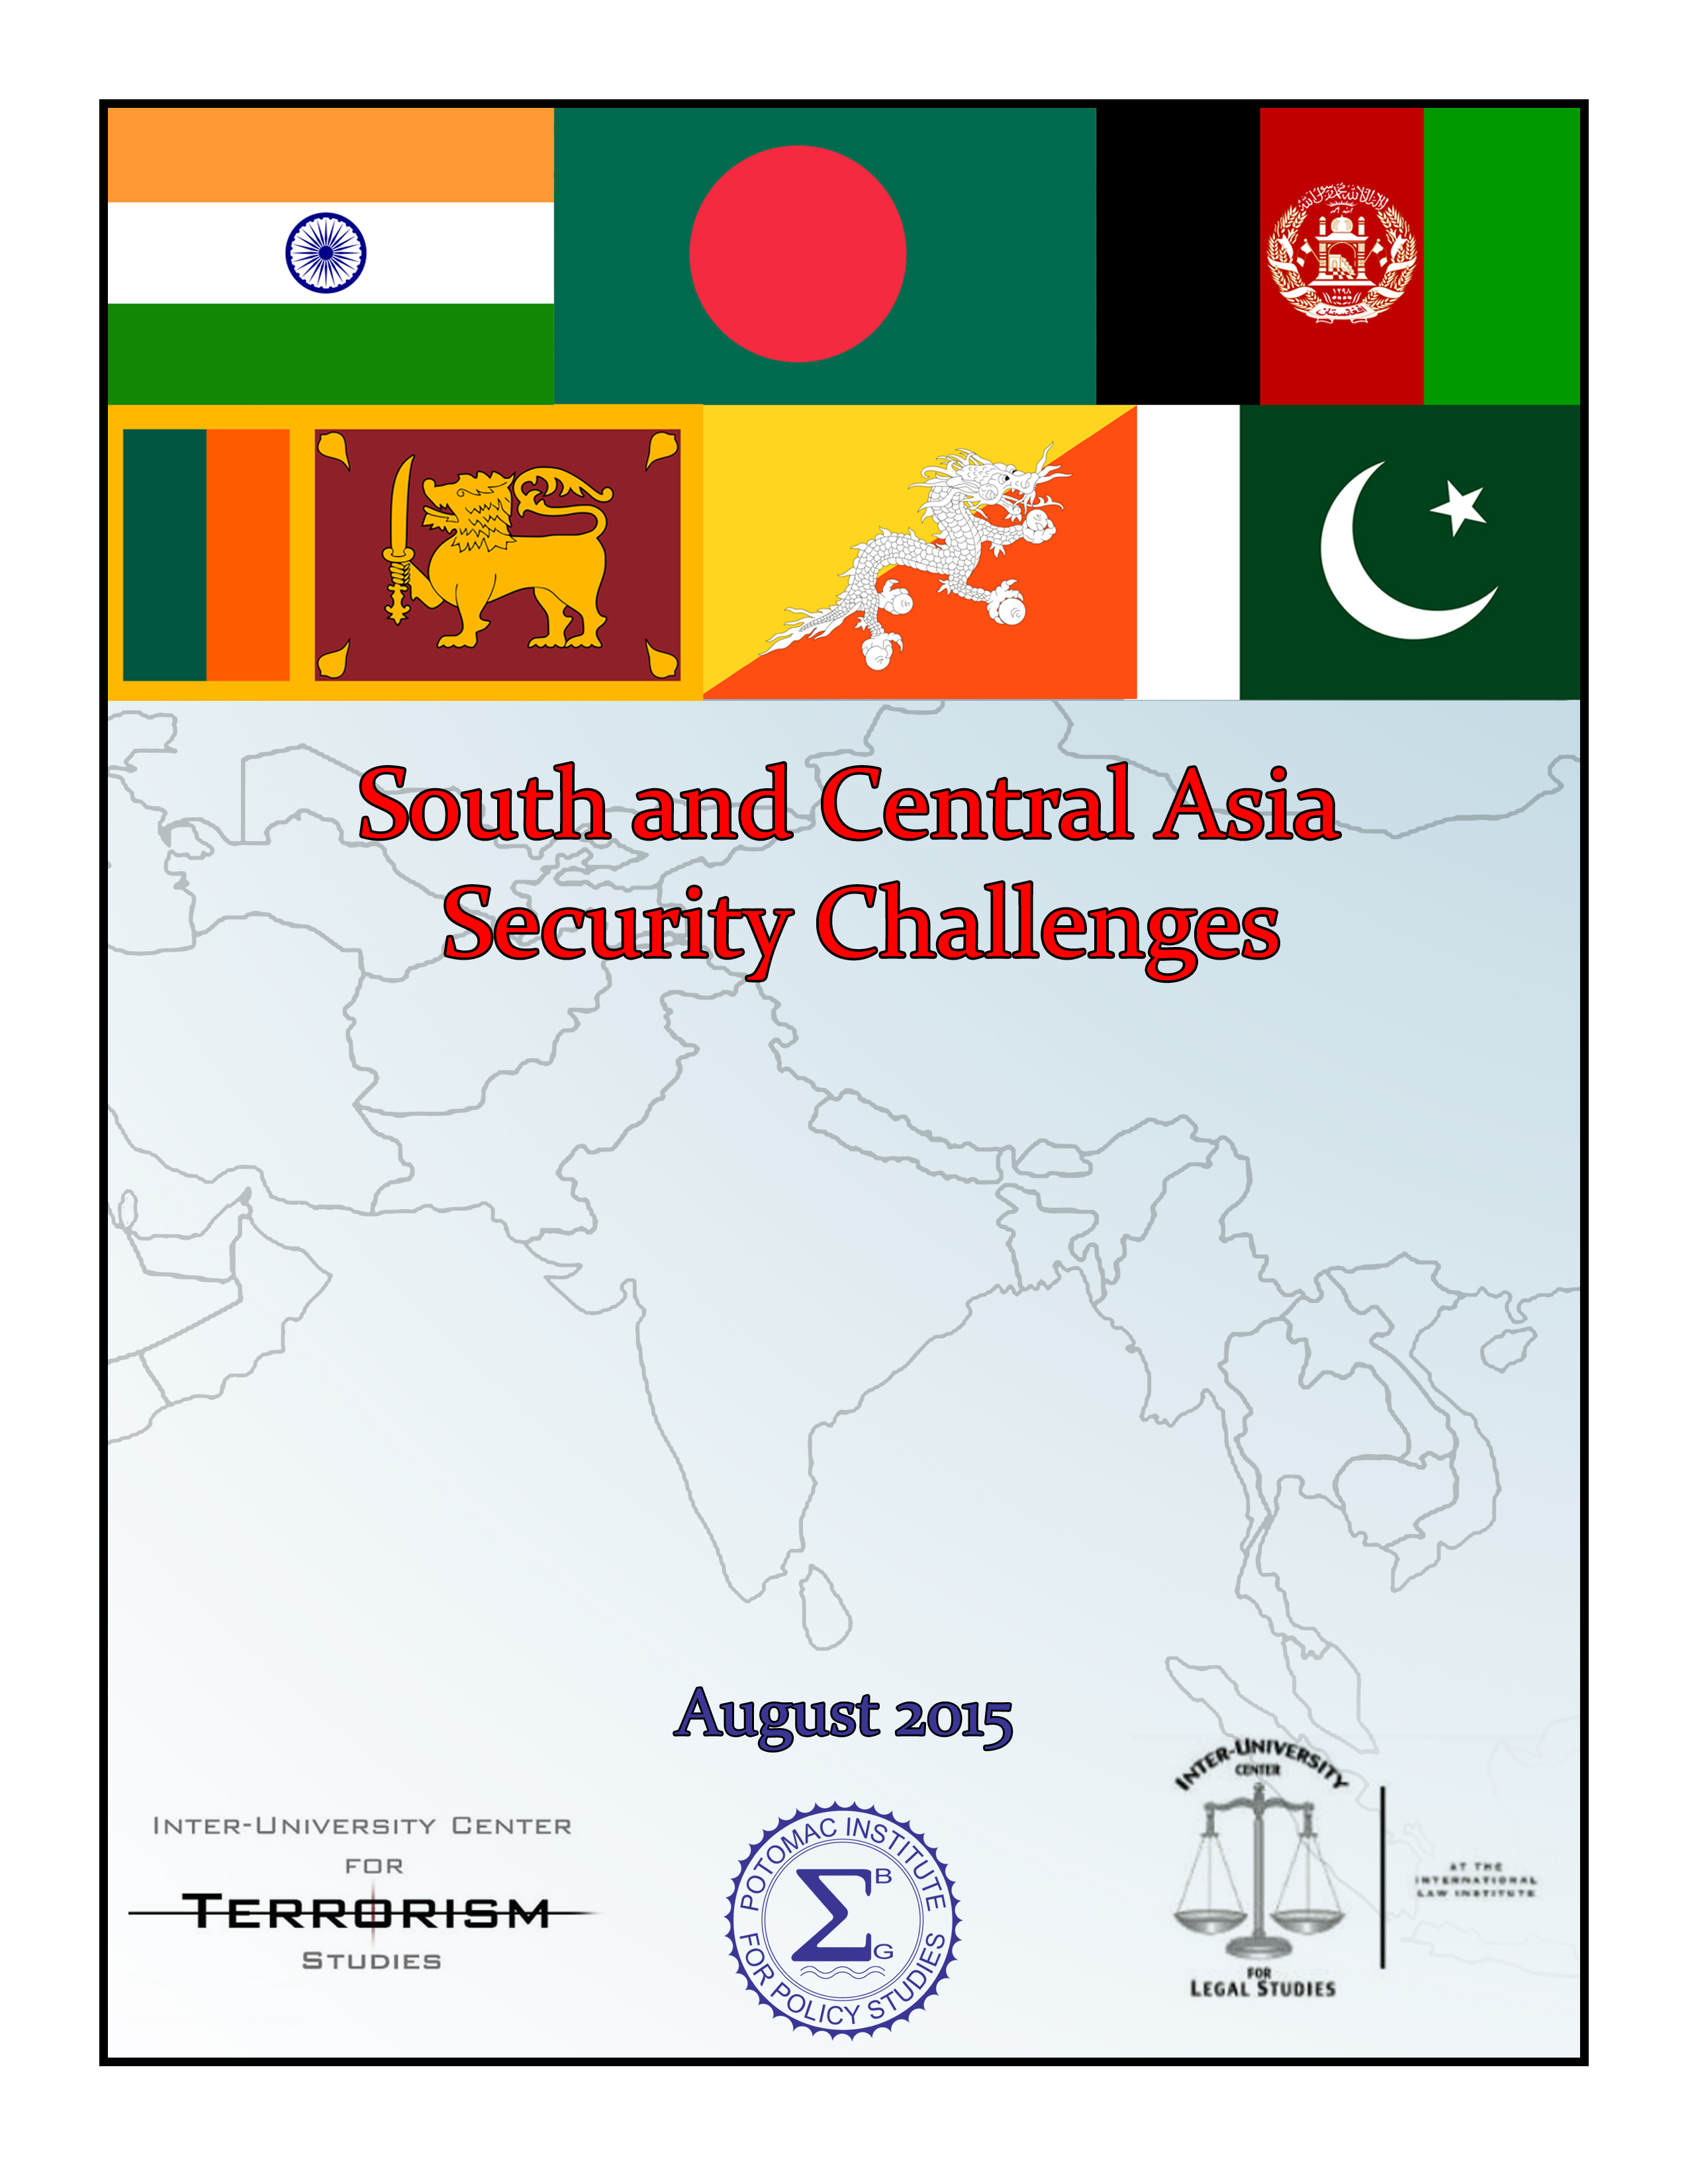 South and Central Asia Security Challenges